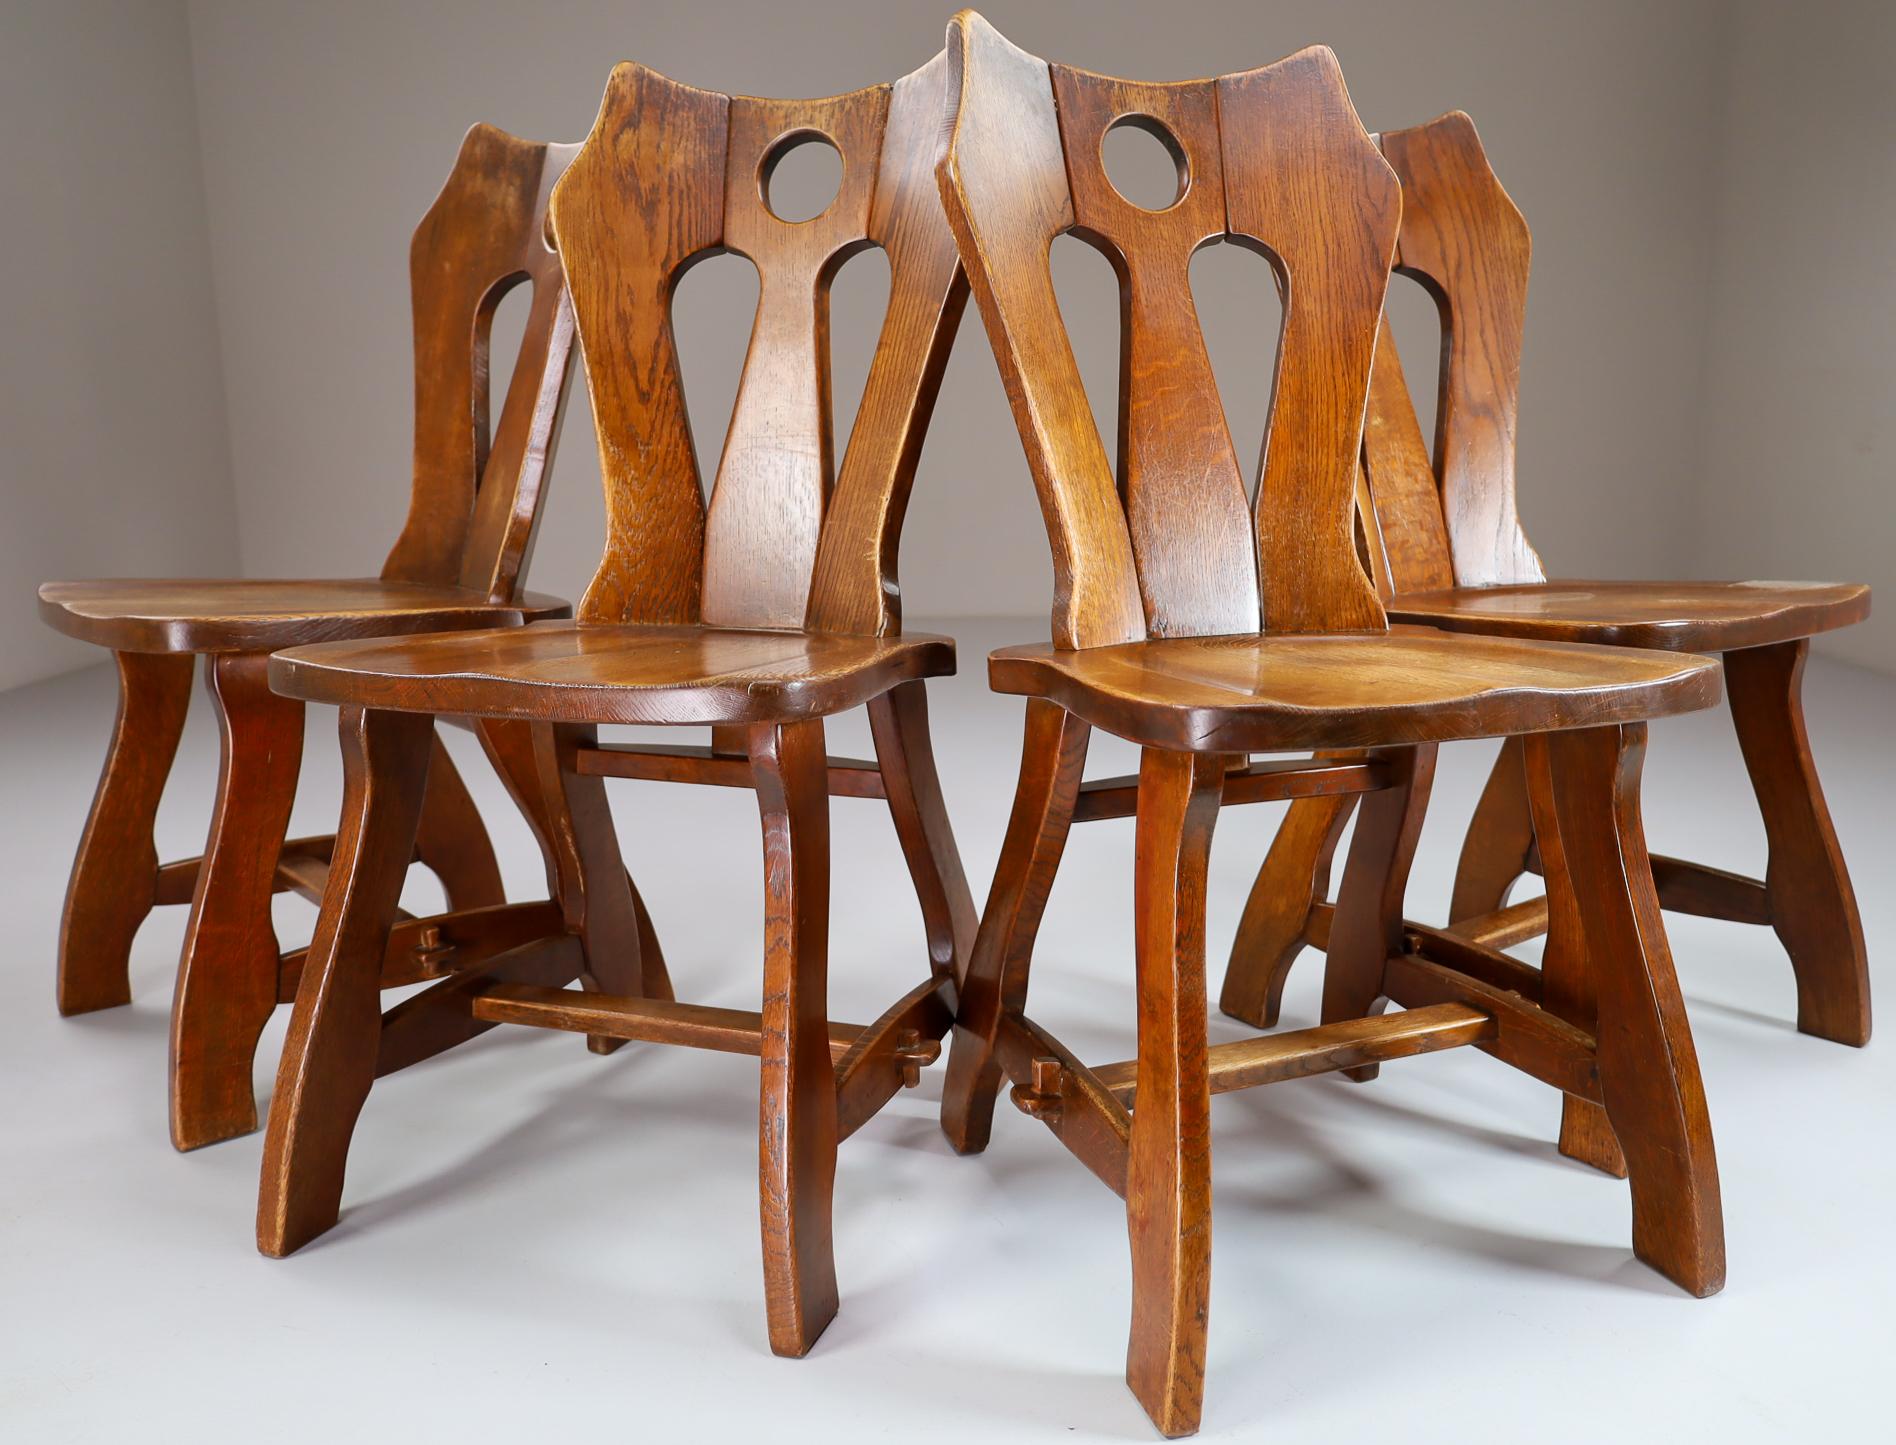 Set of Four Brutalist Chairs in Patinated Oak, Belgium, 1960s For Sale 2